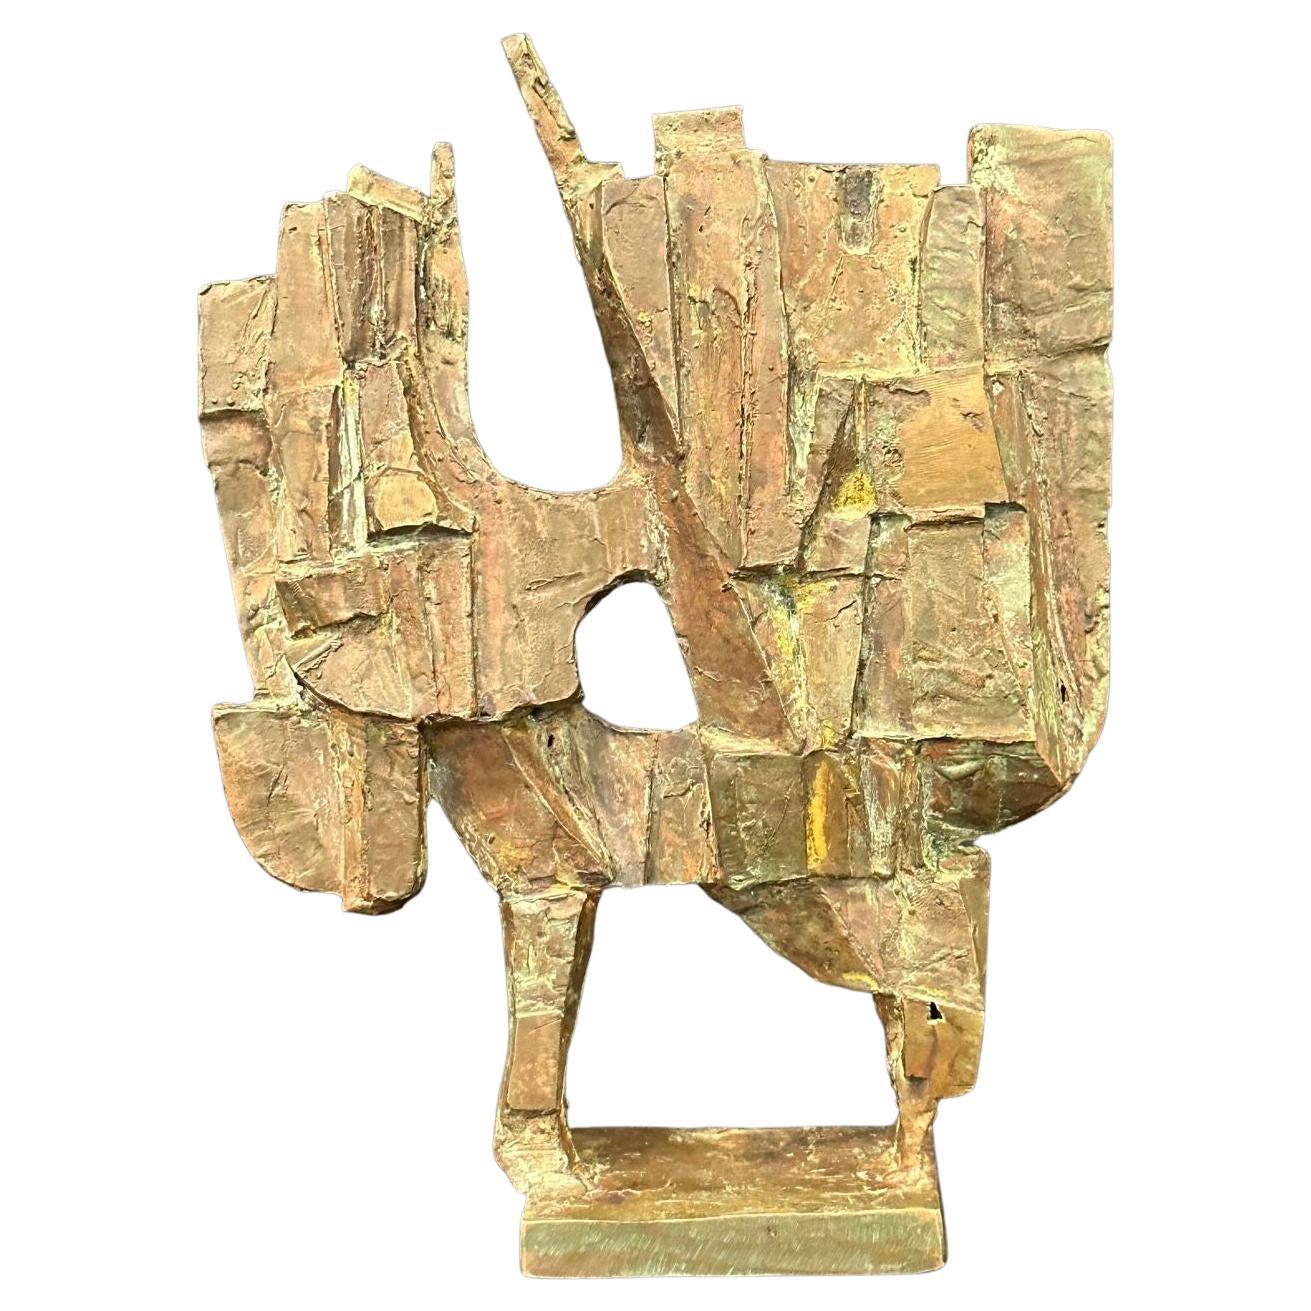 Midcentury Brutalist Abstract Sculpture, Patinated Bronze Decorative Art Object